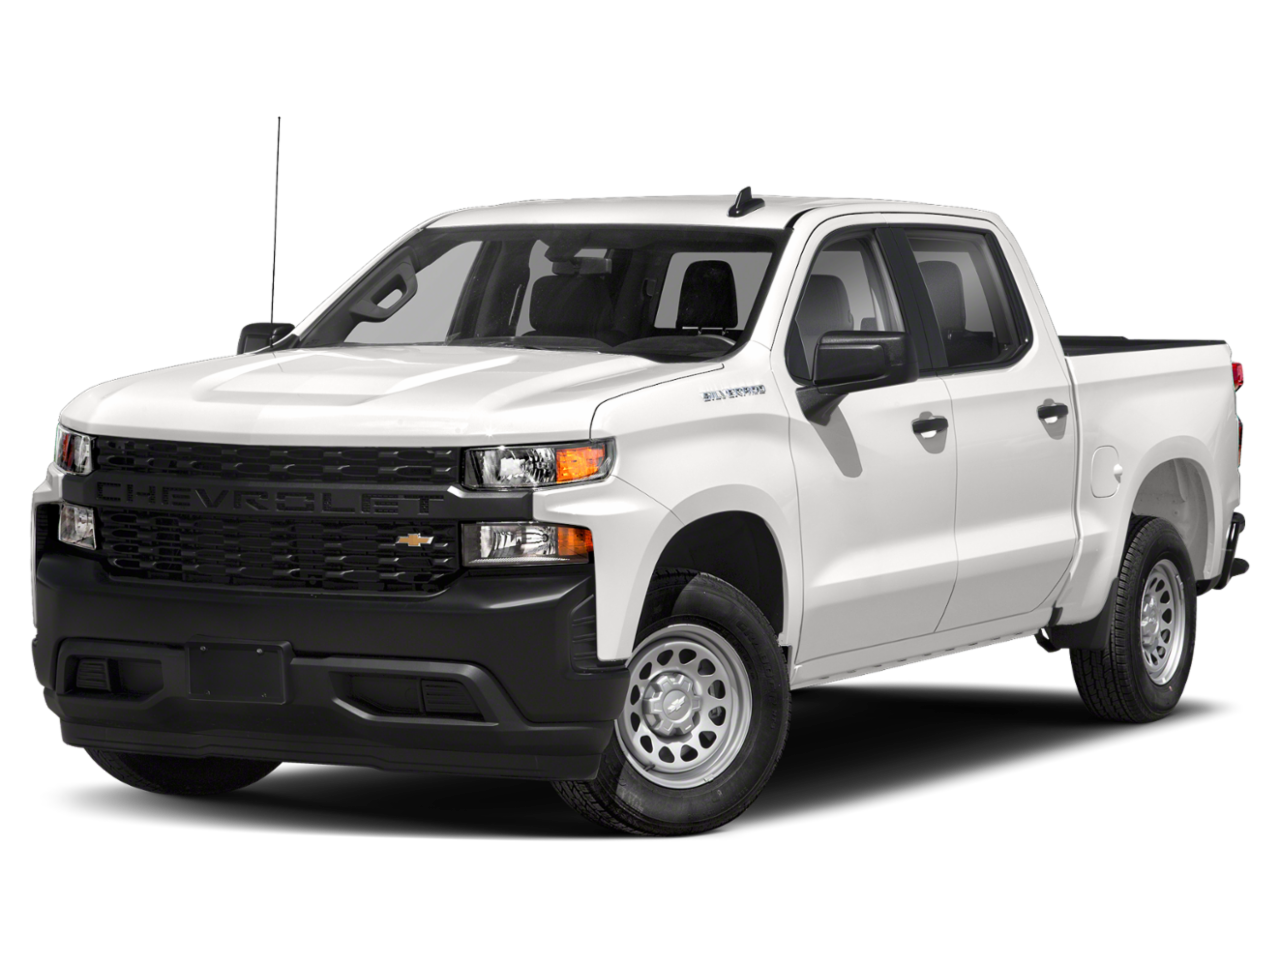 New Chevrolet silverado1500 from your Muncie, IN dealership, All